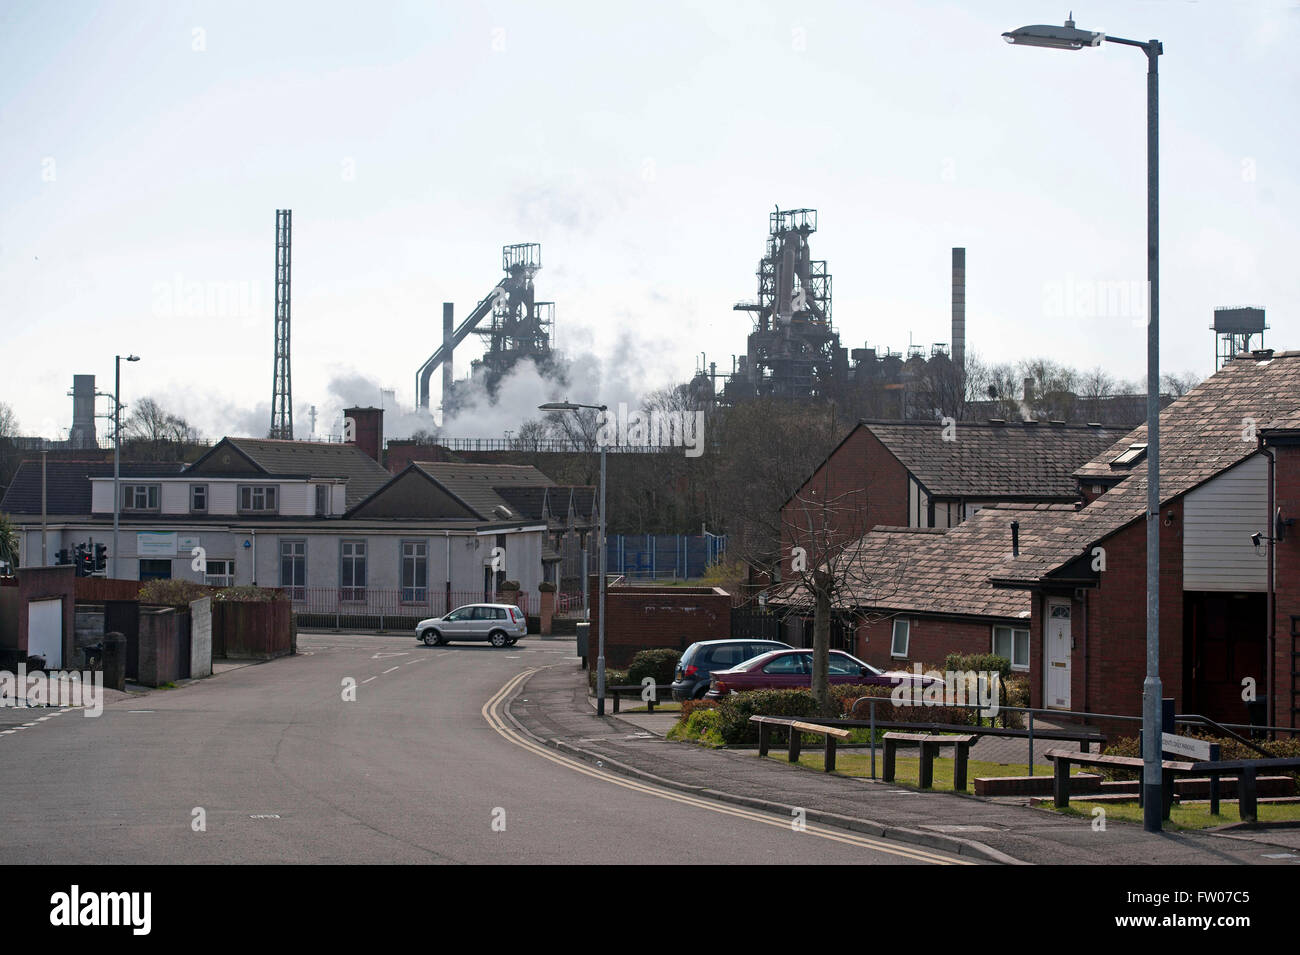 Port Talbot, UK. 31st Mar, 2016. The Tata Steel Works in Port Talbot this afternoon. Tata Steel is selling its entire loss-making UK business, with more than 4,000 jobs at the Port Talbot site currently at risk. Credit:  Phil Rees/Alamy Live News Stock Photo